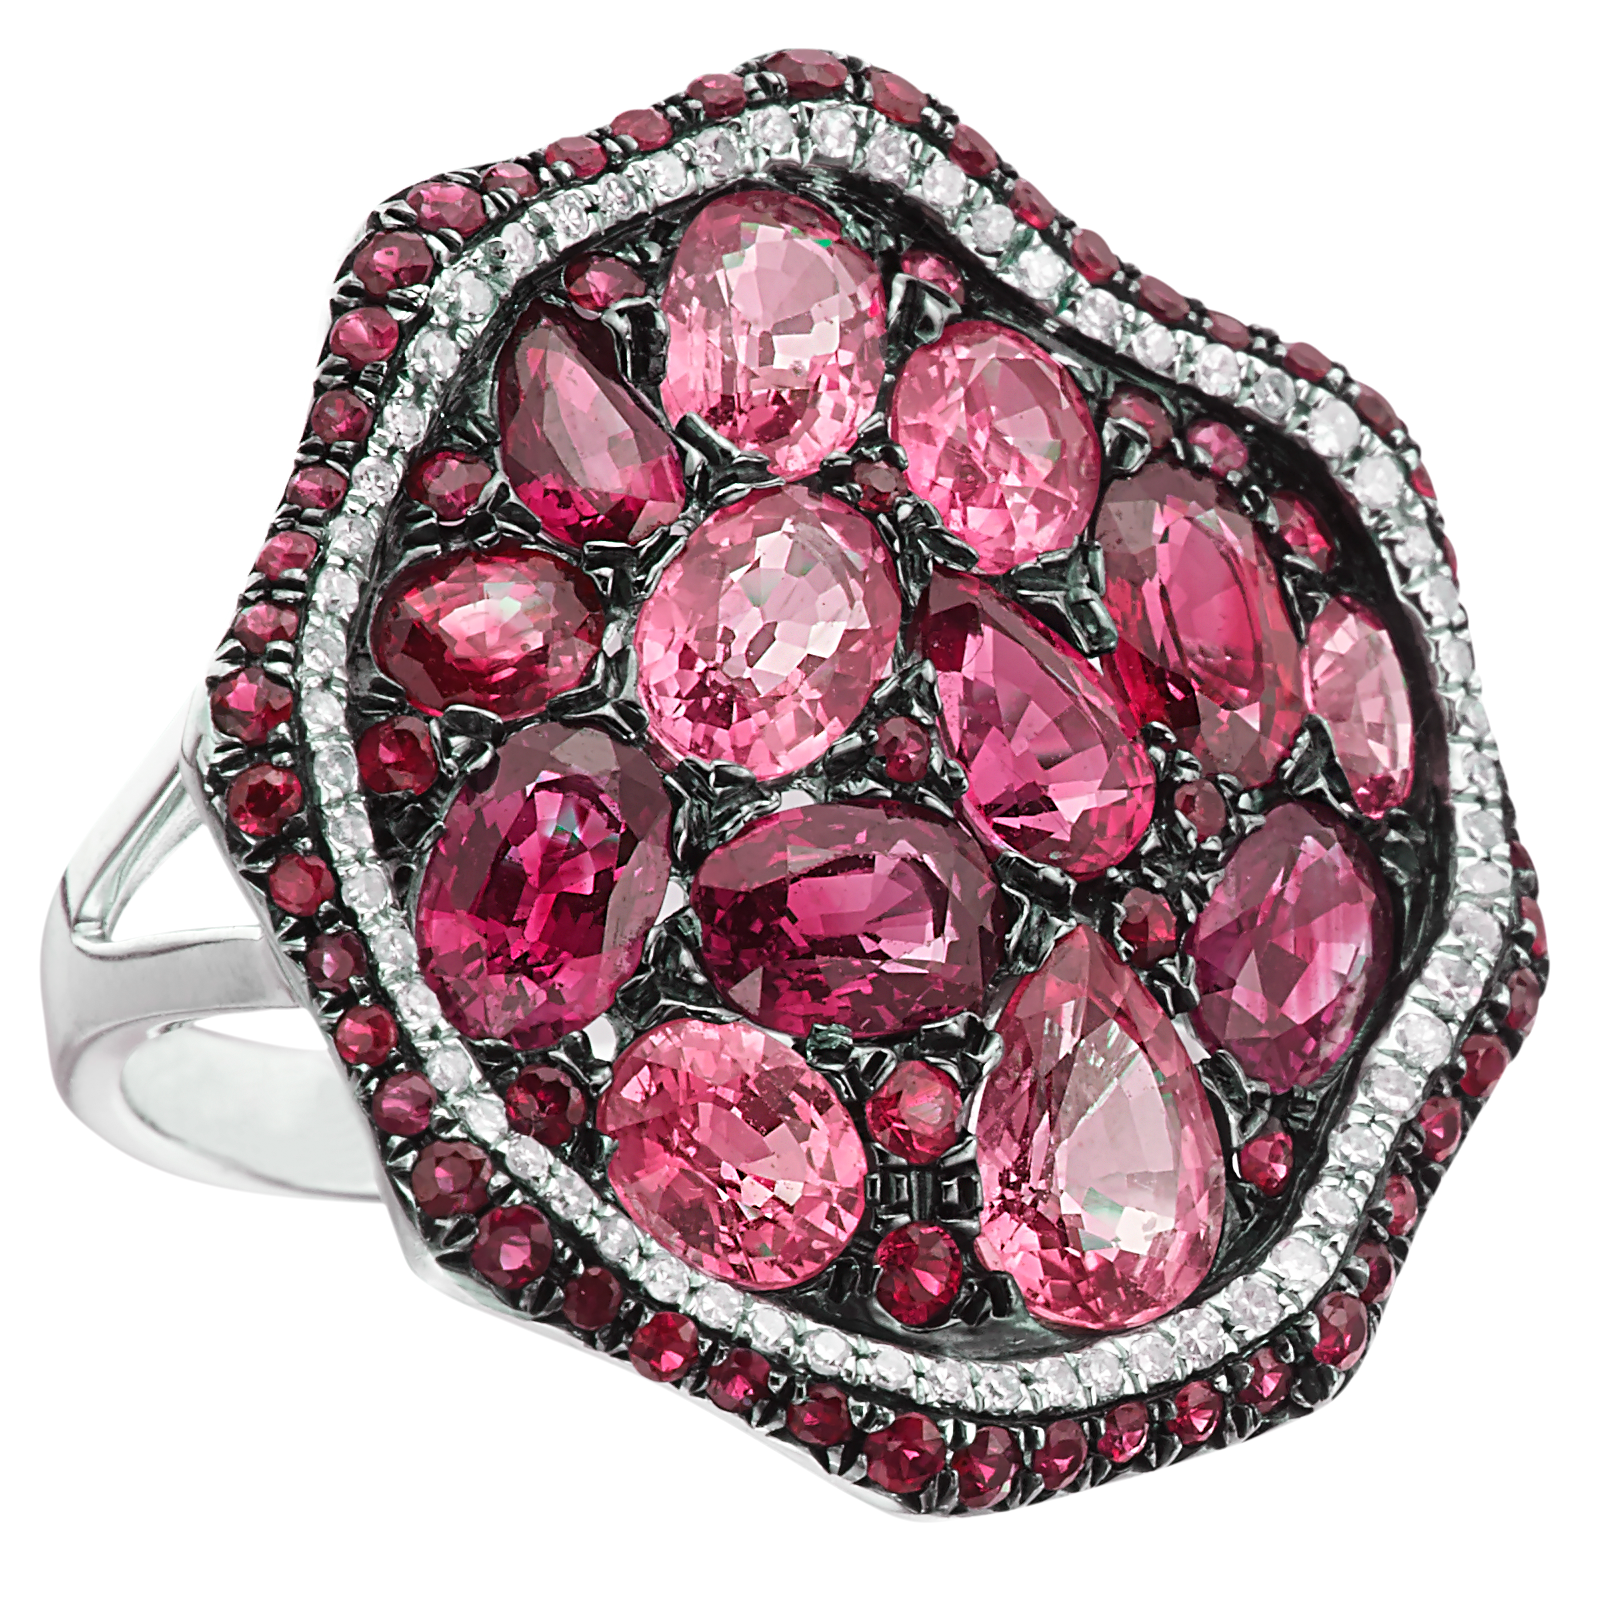 Blue & Pink Sapphire Flower Bypass Ring with Diamonds 18K